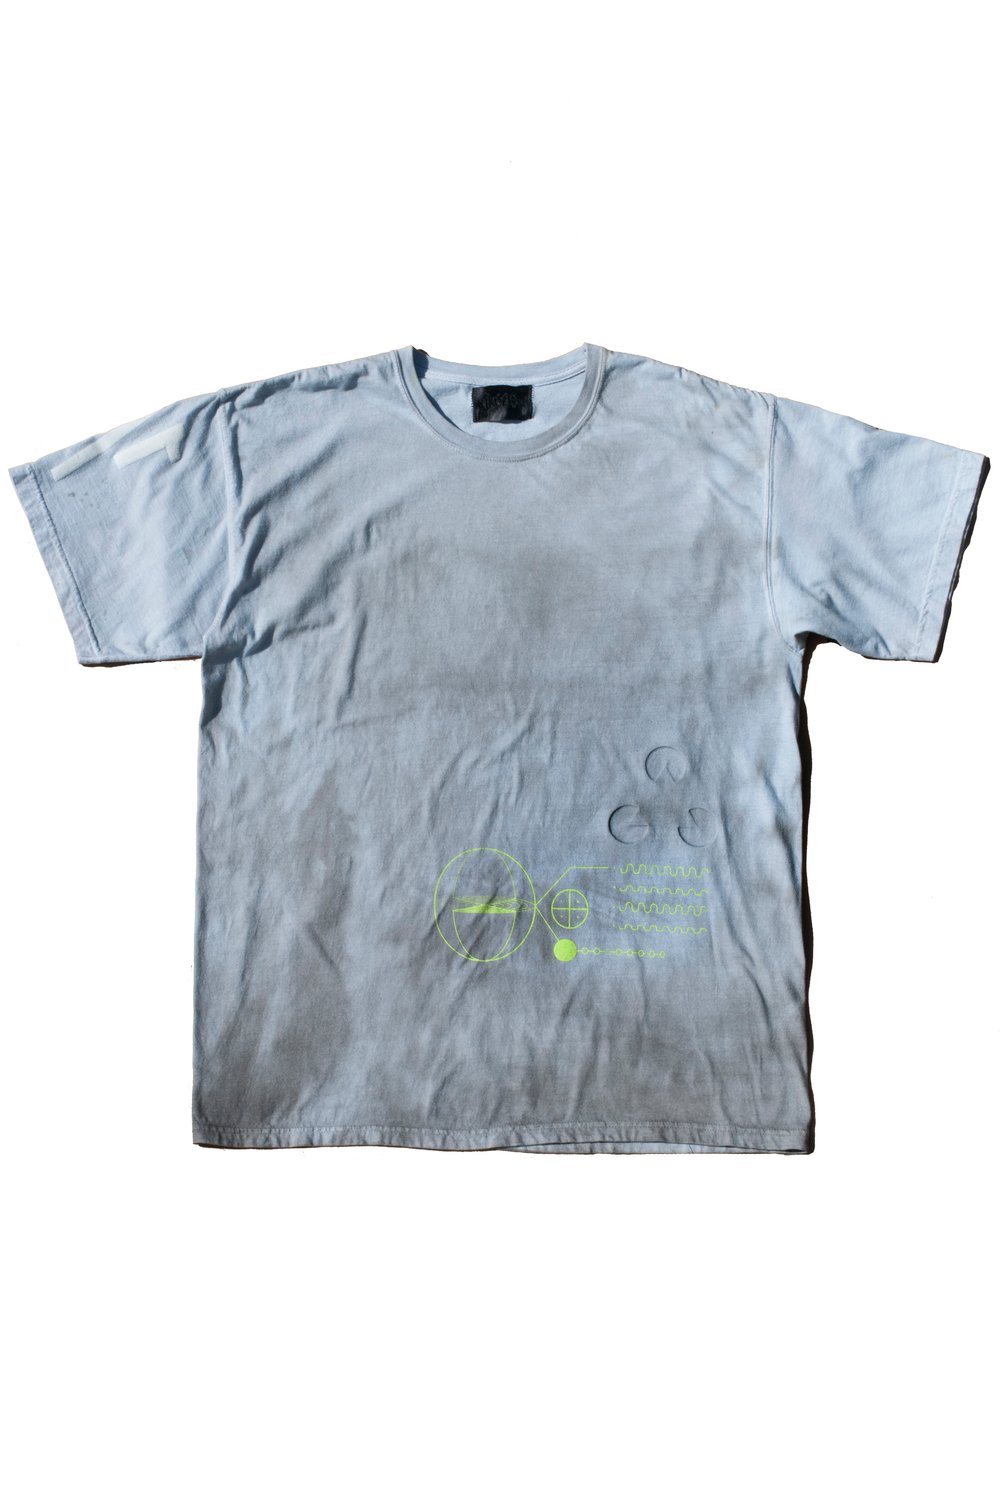 Image of "Carbon Message" T-Shirt (1/1)